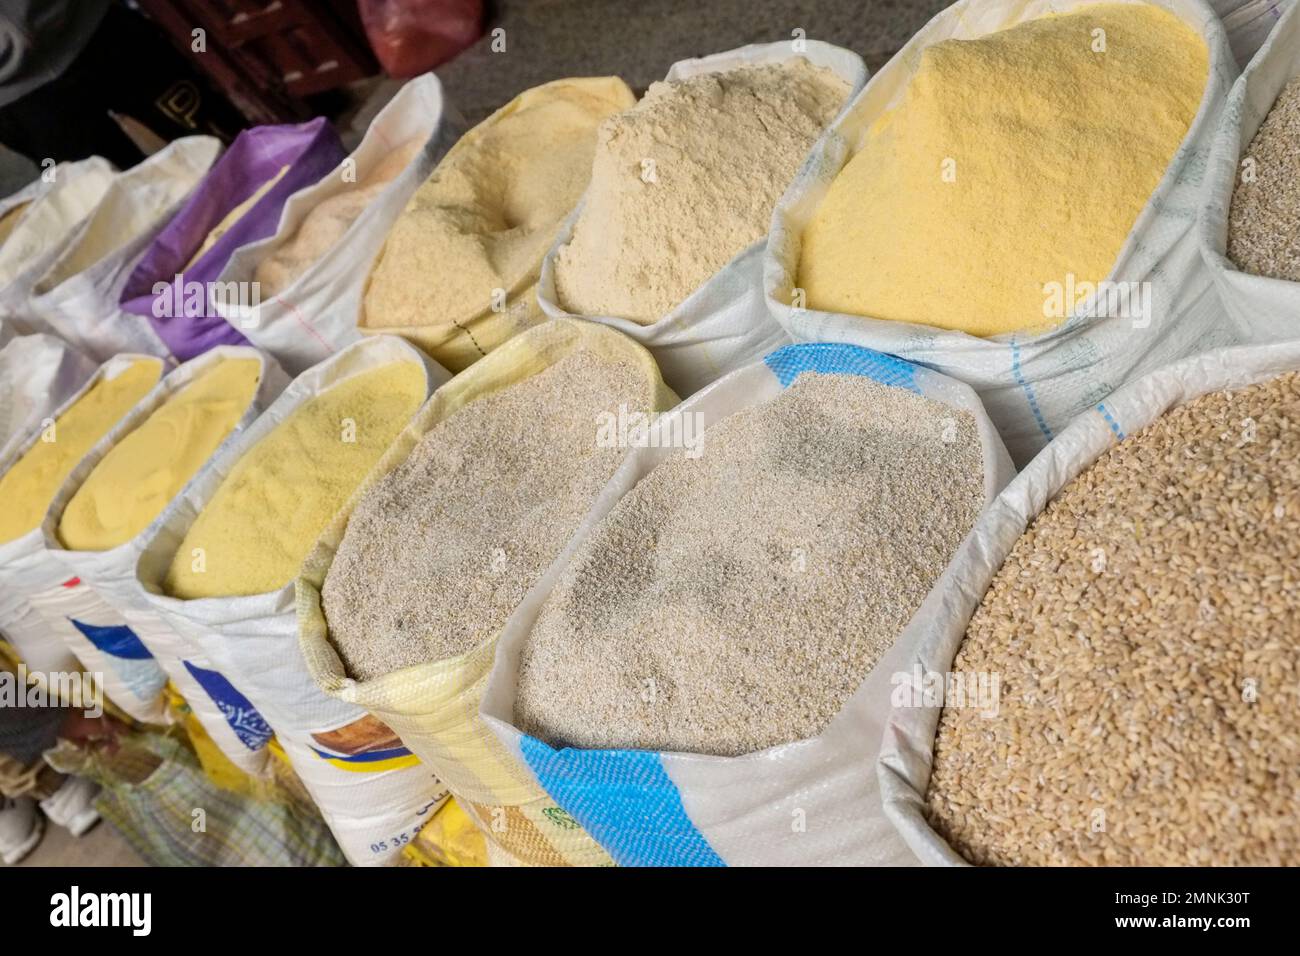 Sacks of grains and cous cous for sale Stock Photo